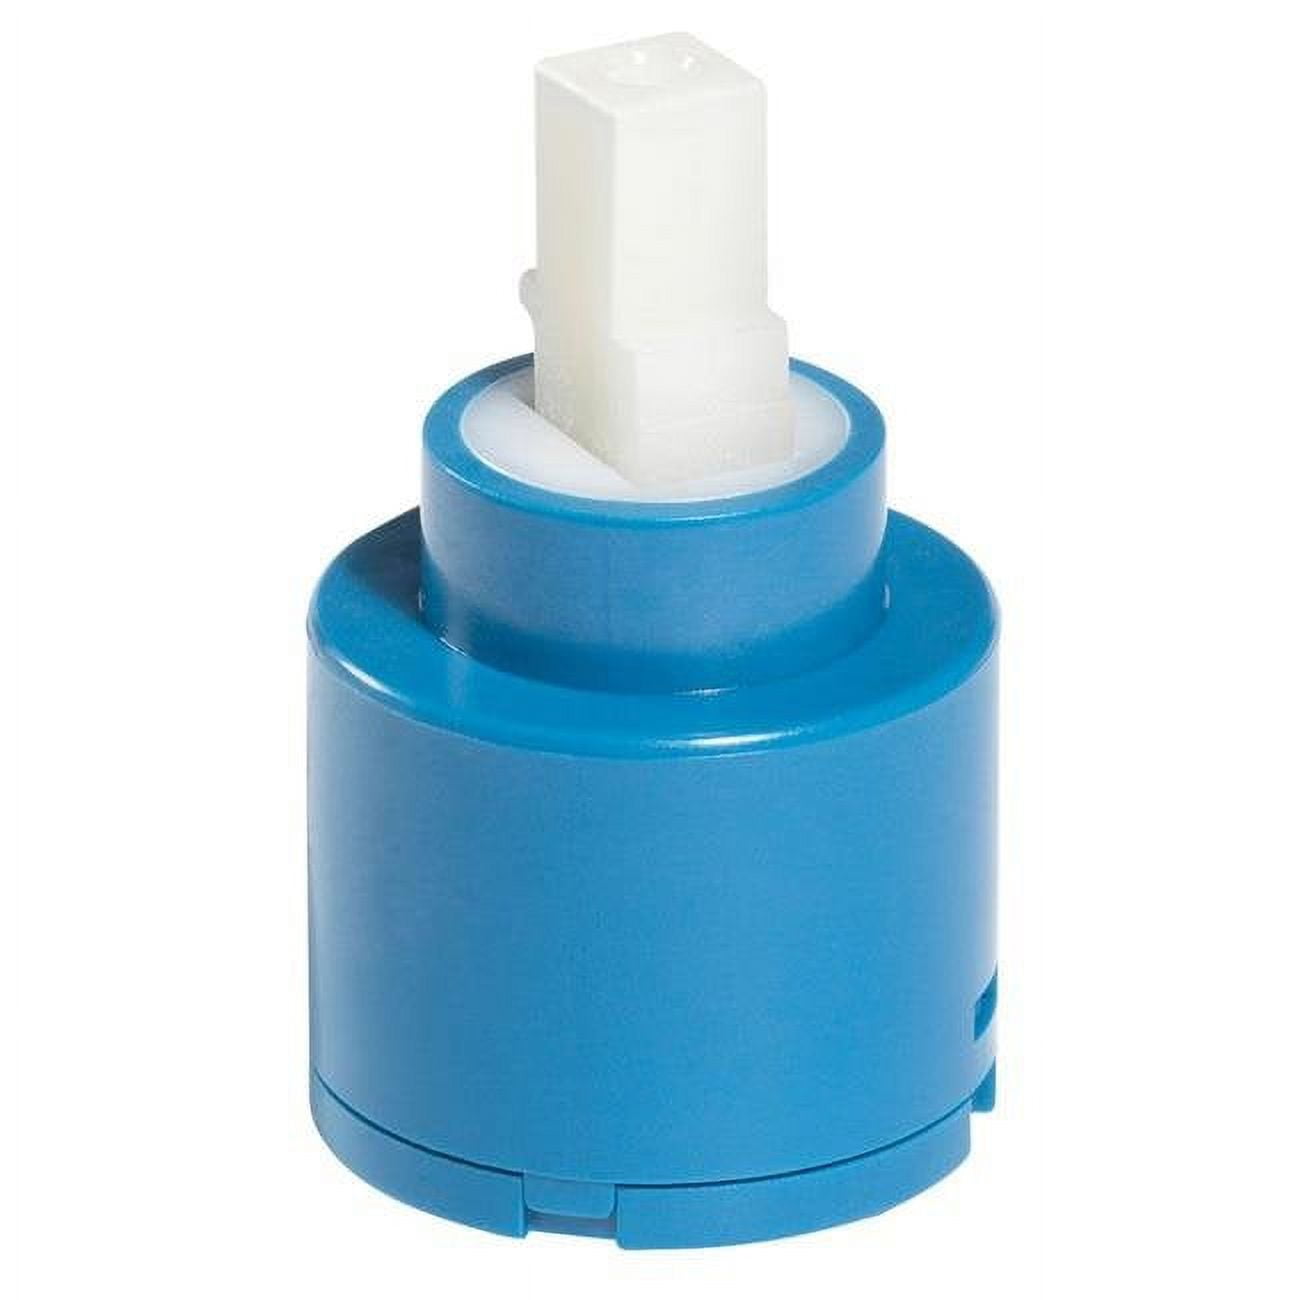 4914578 Hot & Cold Faucet Cartridge For Costal - Pack Of 5